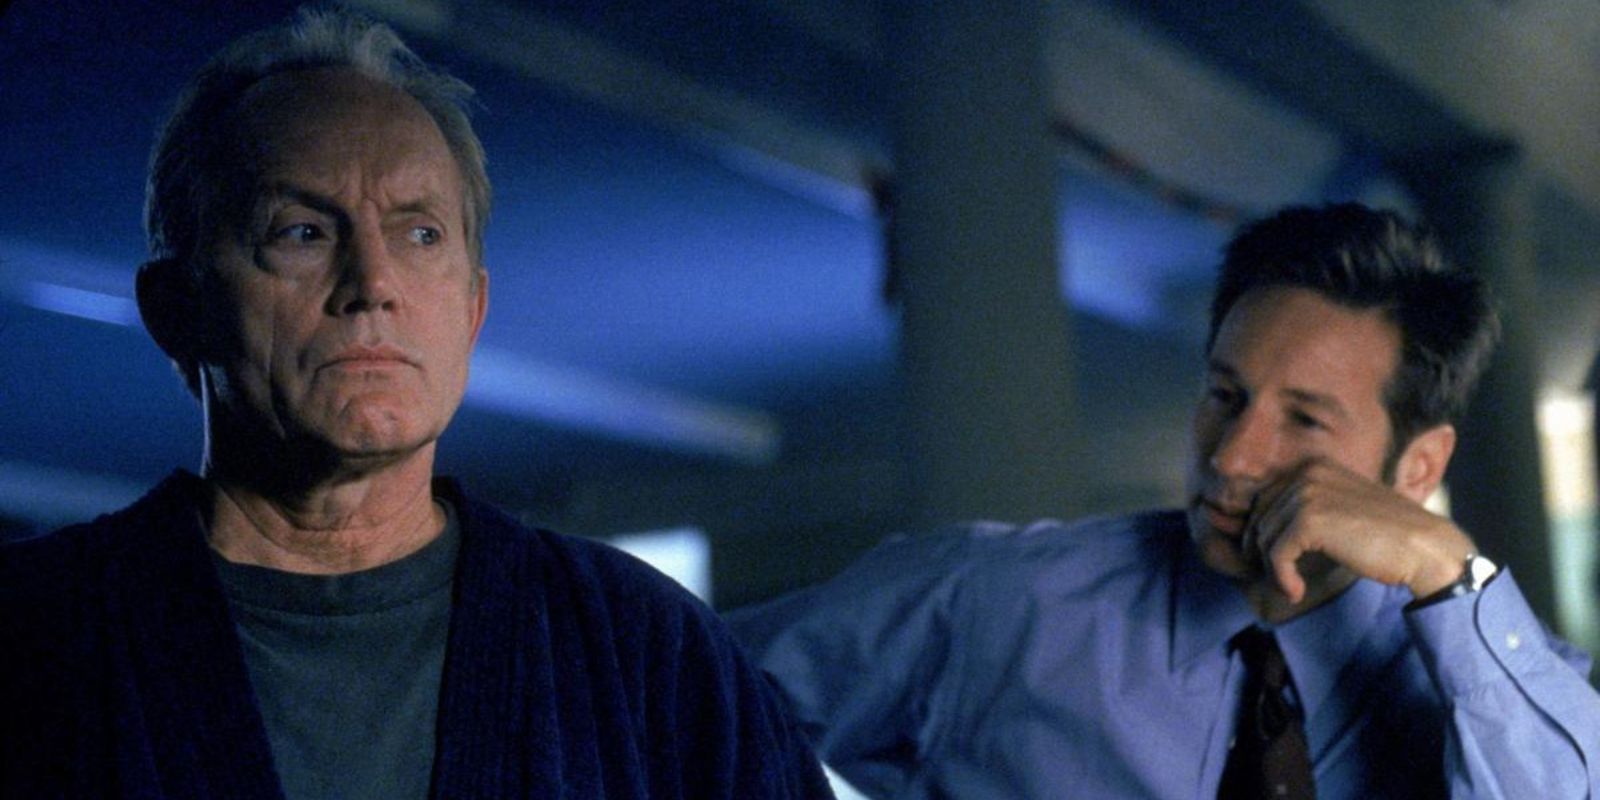 Frank Black with Fox Mulder in The X-Files